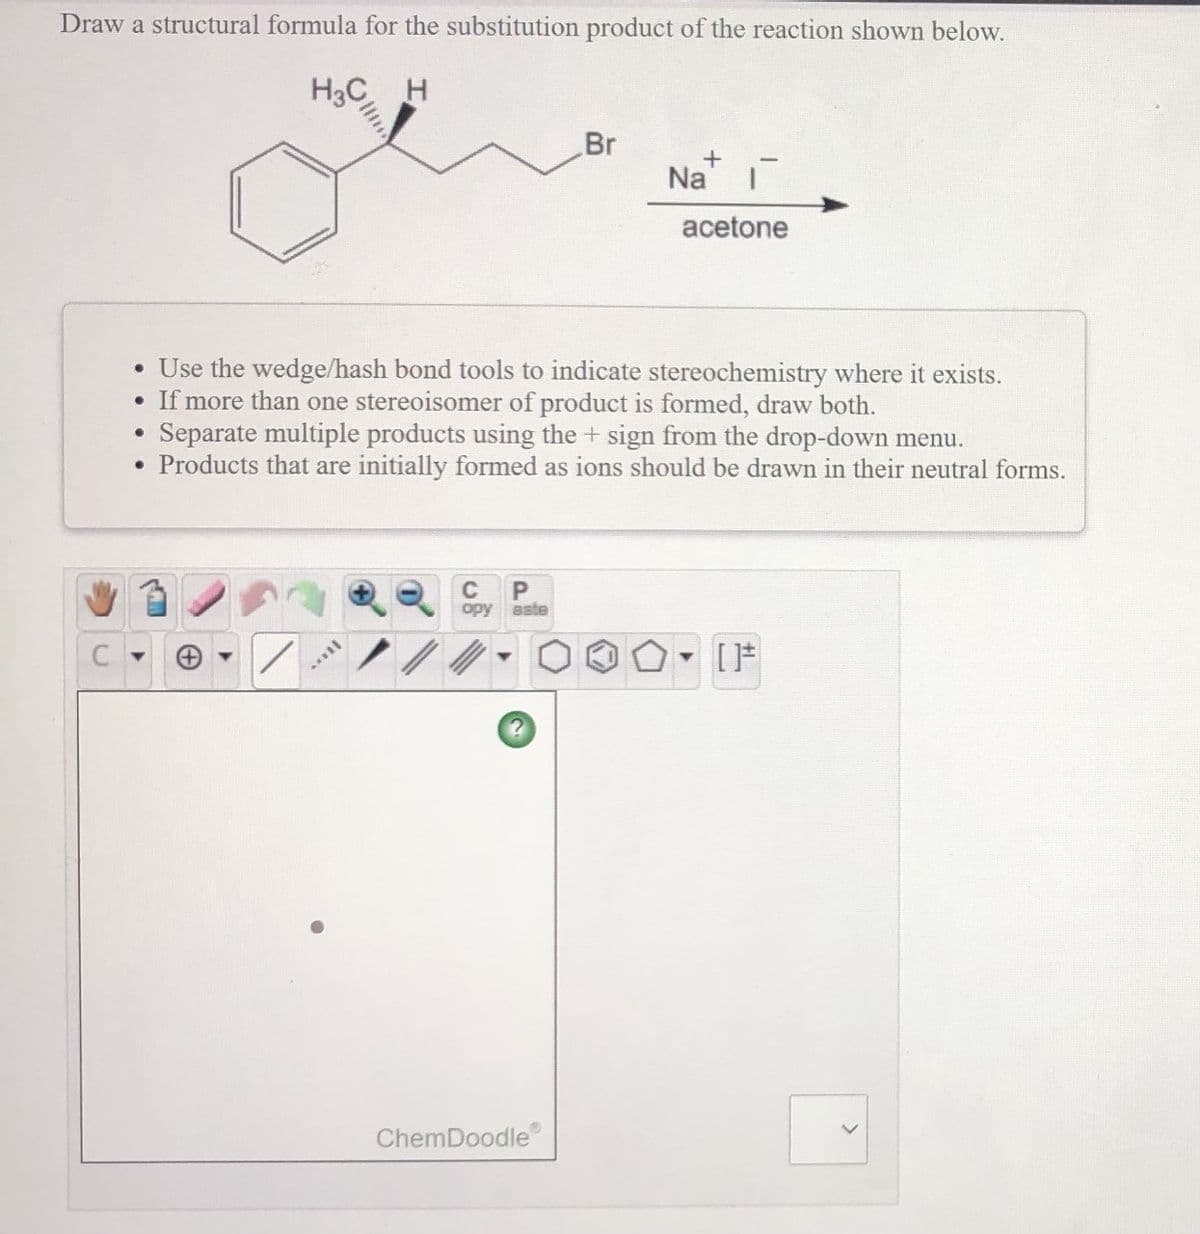 Draw a structural formula for the substitution product of the reaction shown below.
H3C H
Br
Na'
acetone
• Use the wedge/hash bond tools to indicate stereochemistry where it exists.
• If more than one stereoisomer of product is formed, draw both.
Separate multiple products using the + sign from the drop-down menu.
• Products that are initially formed as ions should be drawn in their neutral forms.
C
P
opy aste
[F
ChemDoodle
